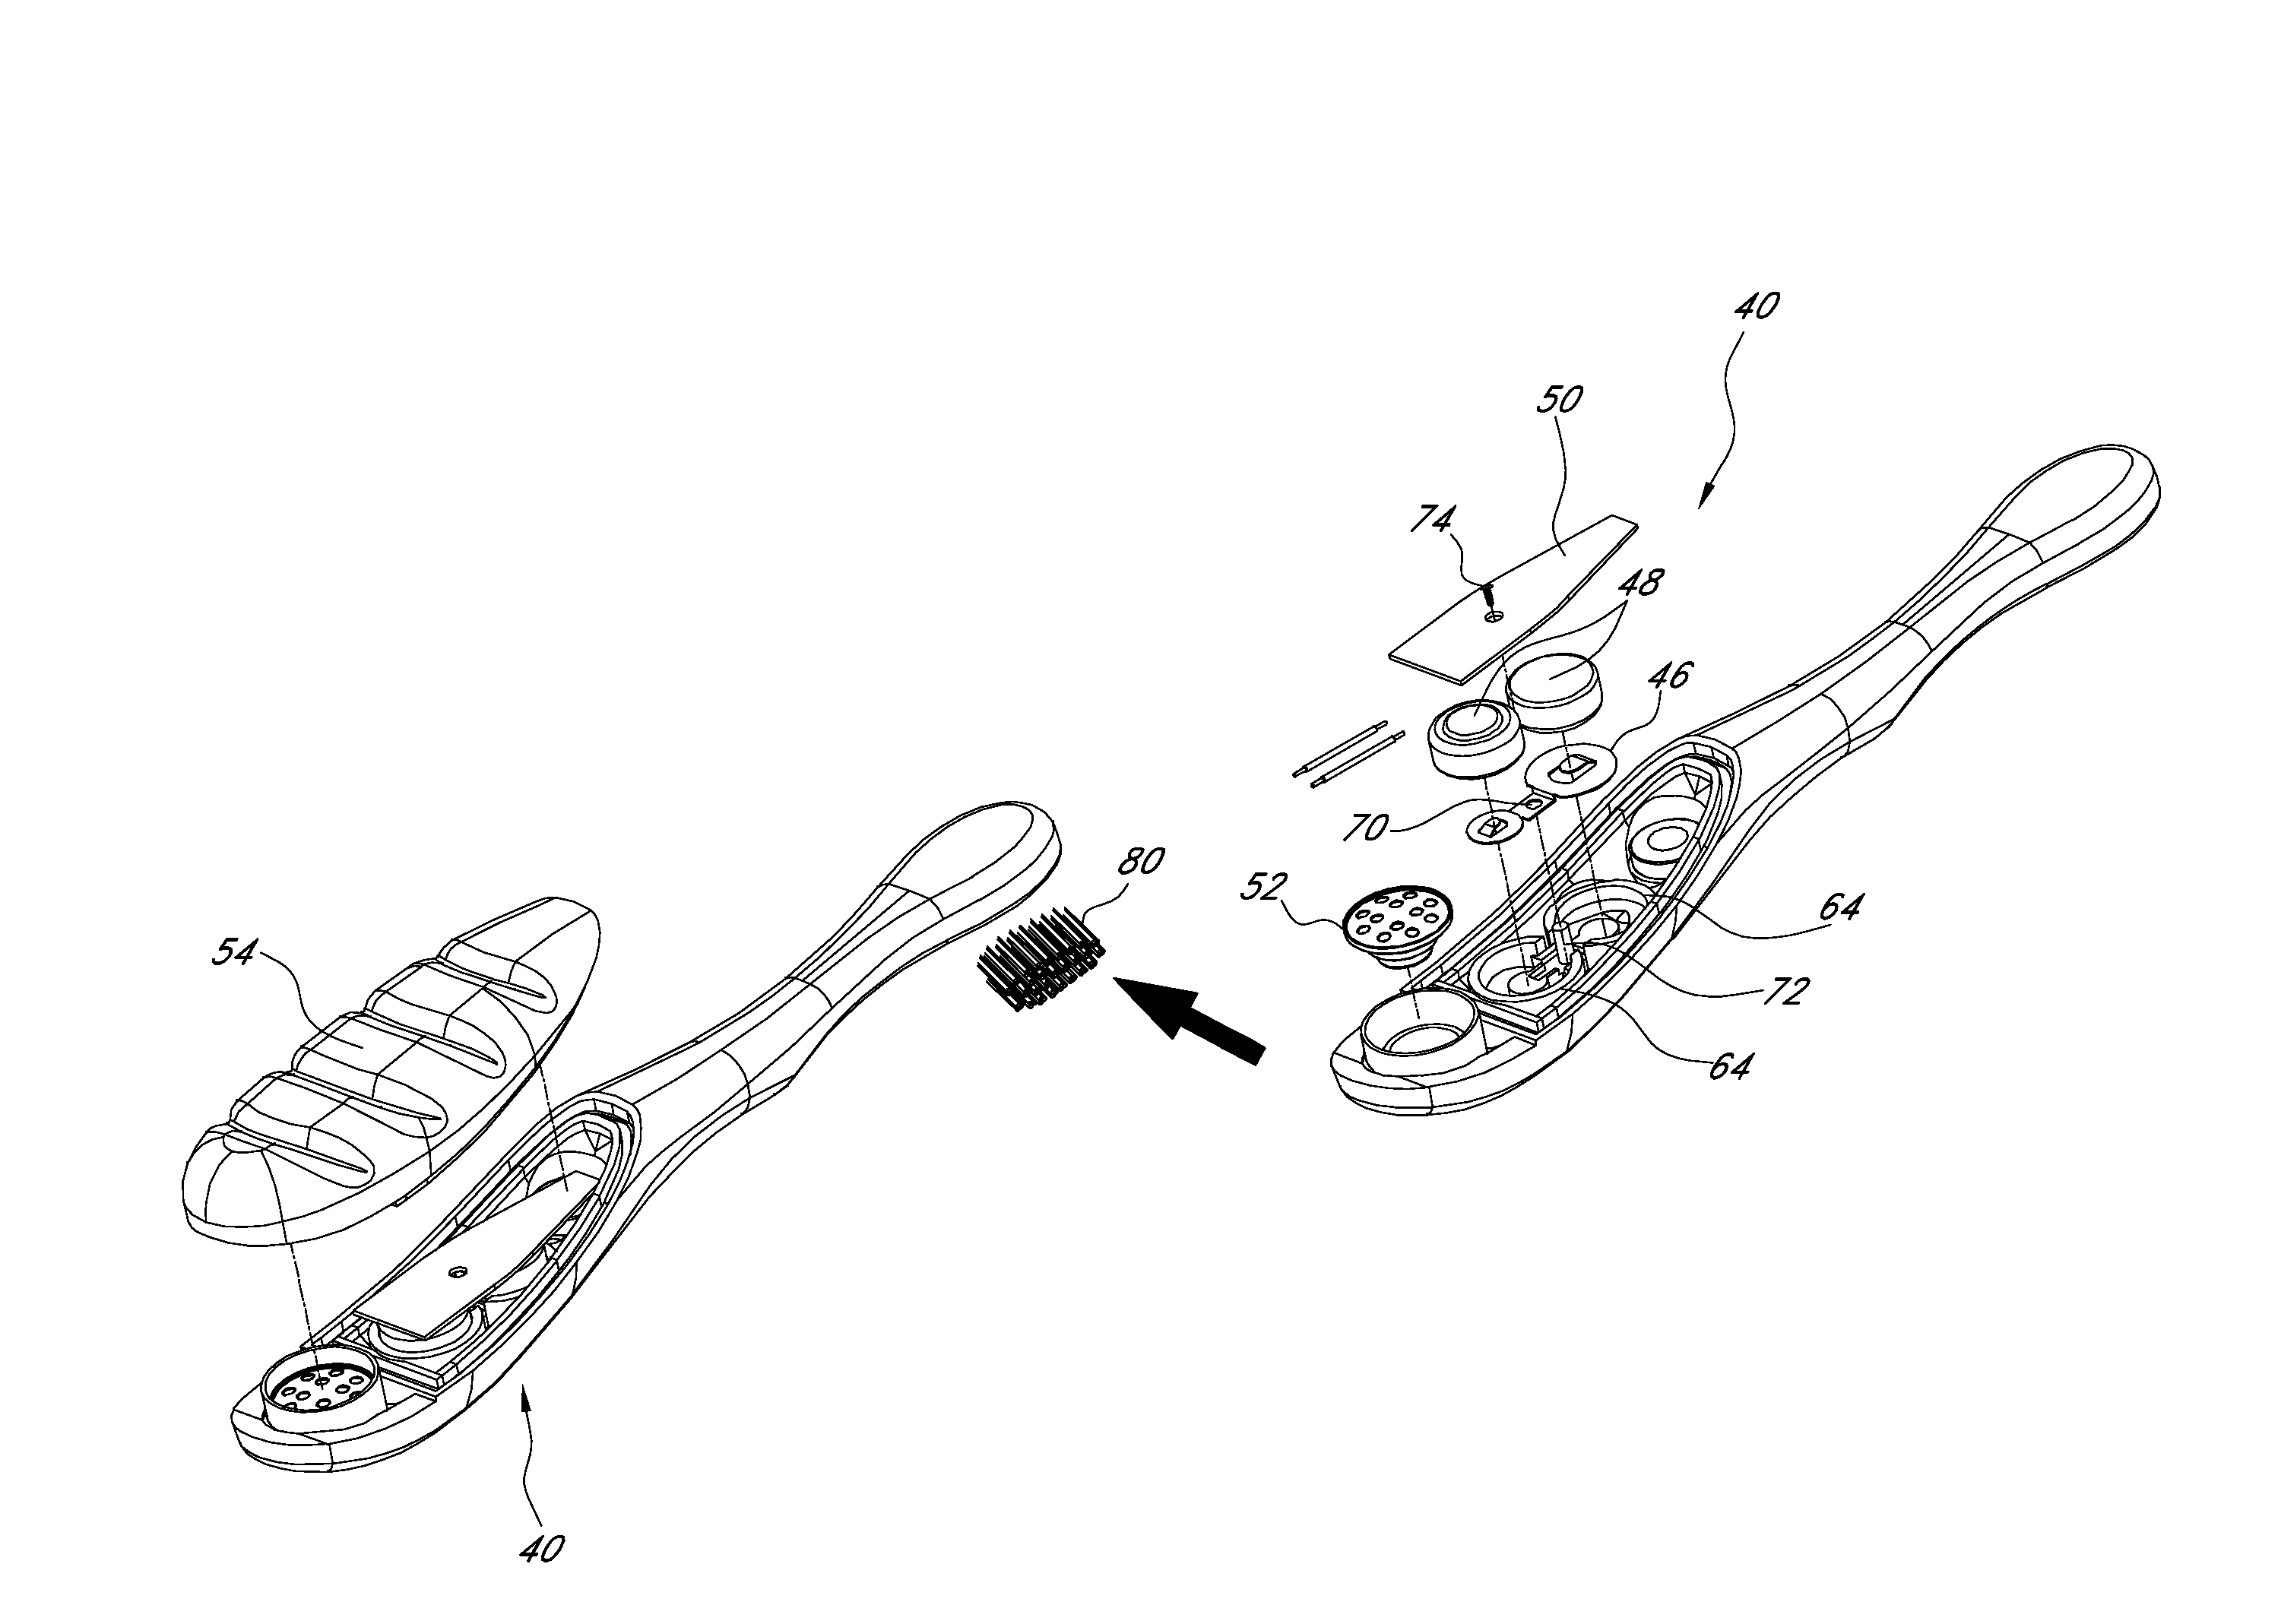 Toothbrush and method of use